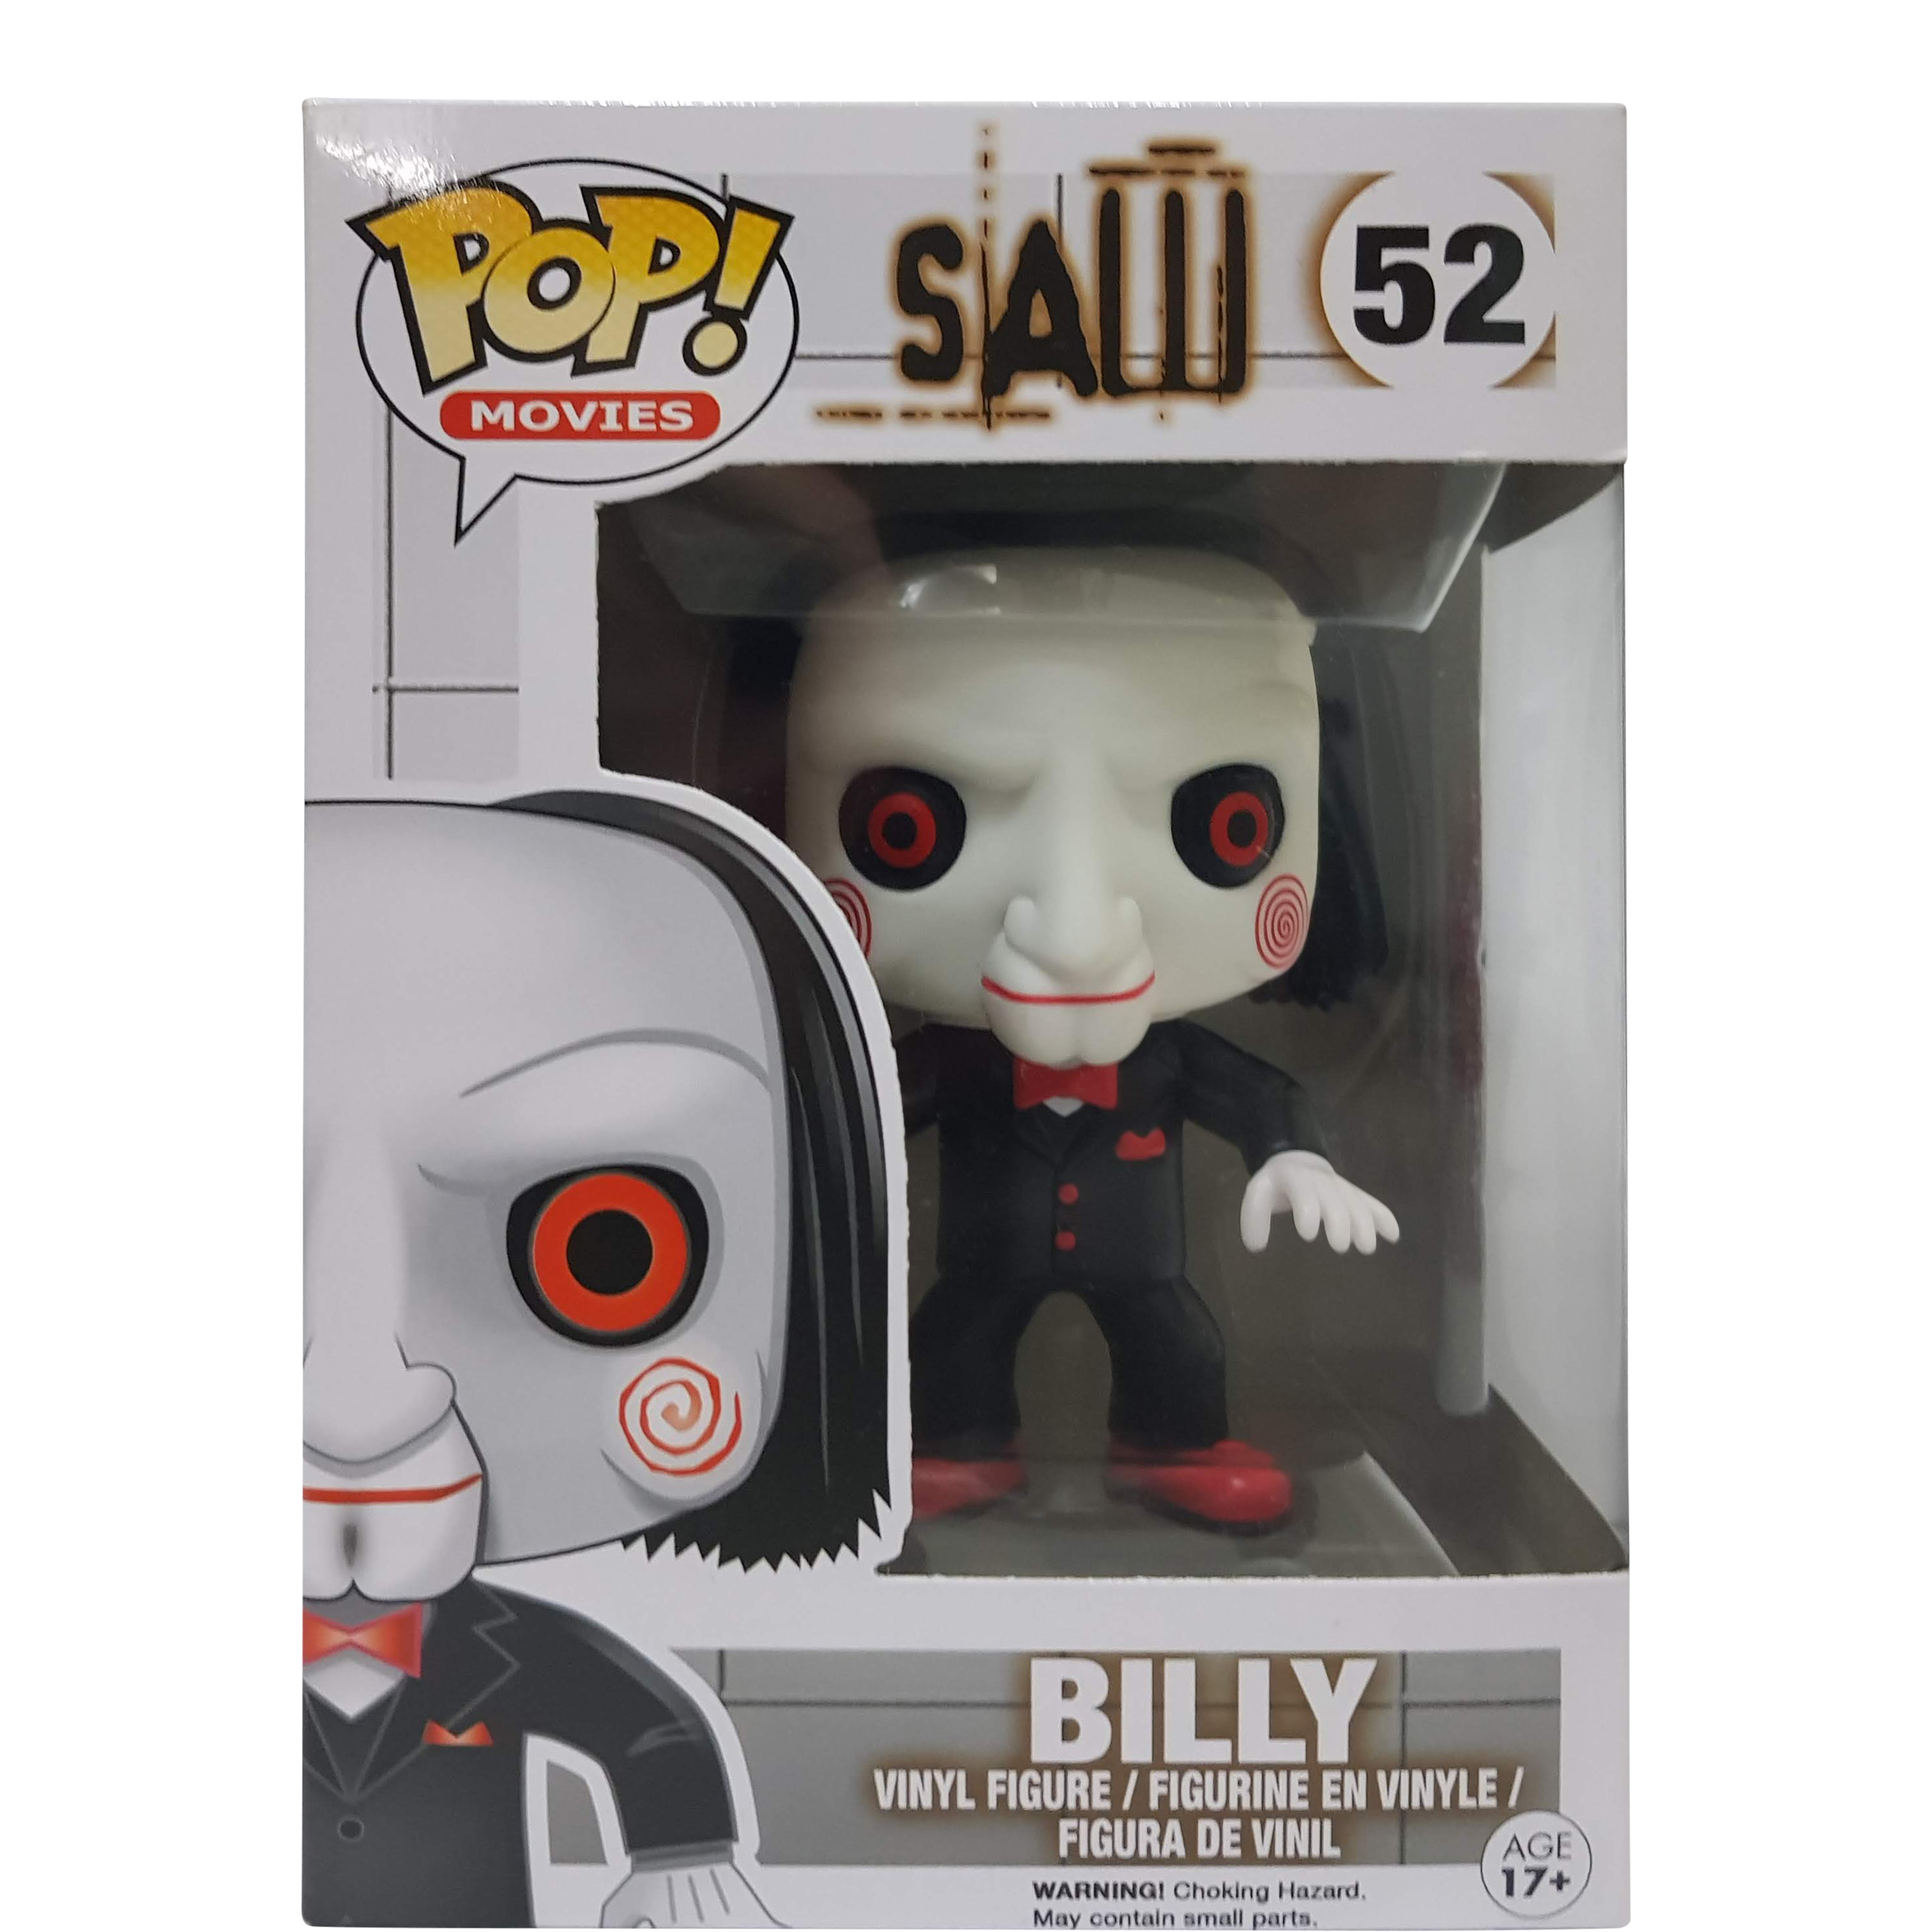 2019 Saw Billy 52# Funko Pop PVC Figure Figurine Luminous Toy Collection Gift 